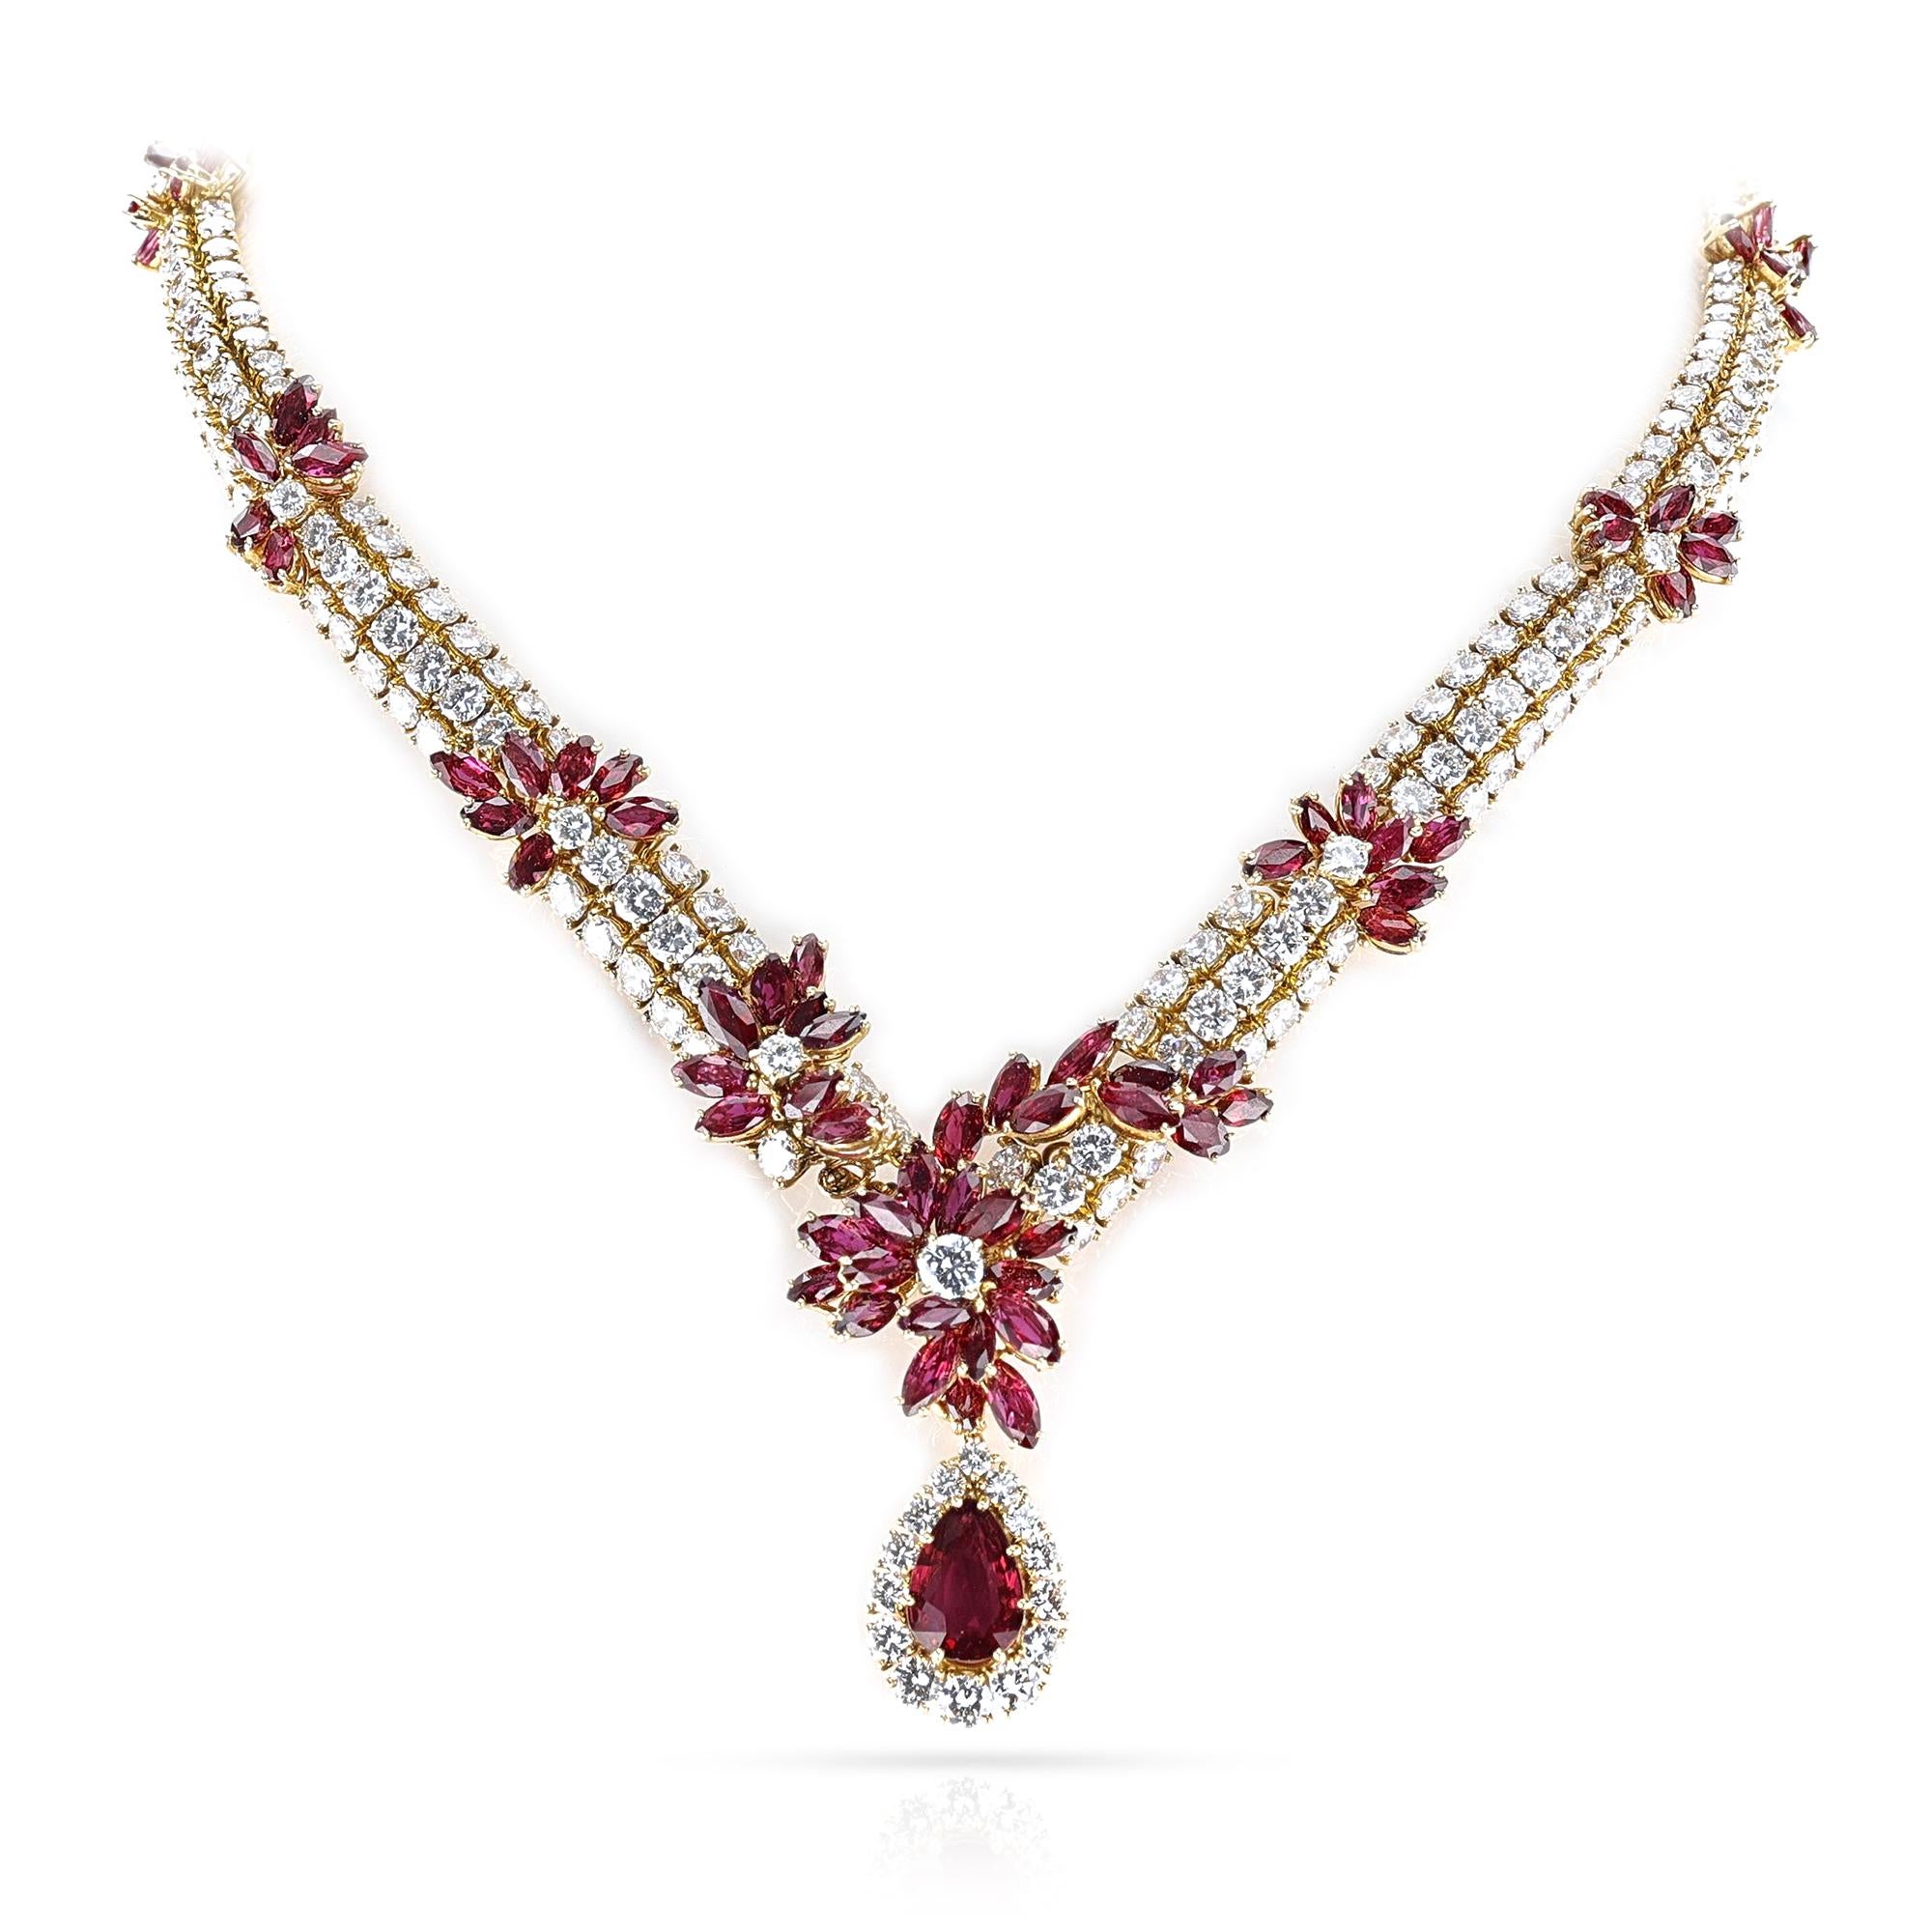 A gorgeous Piaget Ruby and Diamond Necklace and Earring set. The necklace has 405 diamonds for a total of appx. 52 carats and smaller rubies for appx. 23 carats. The large pear ruby in the center weighs approx. 3 carats. The total weight of the